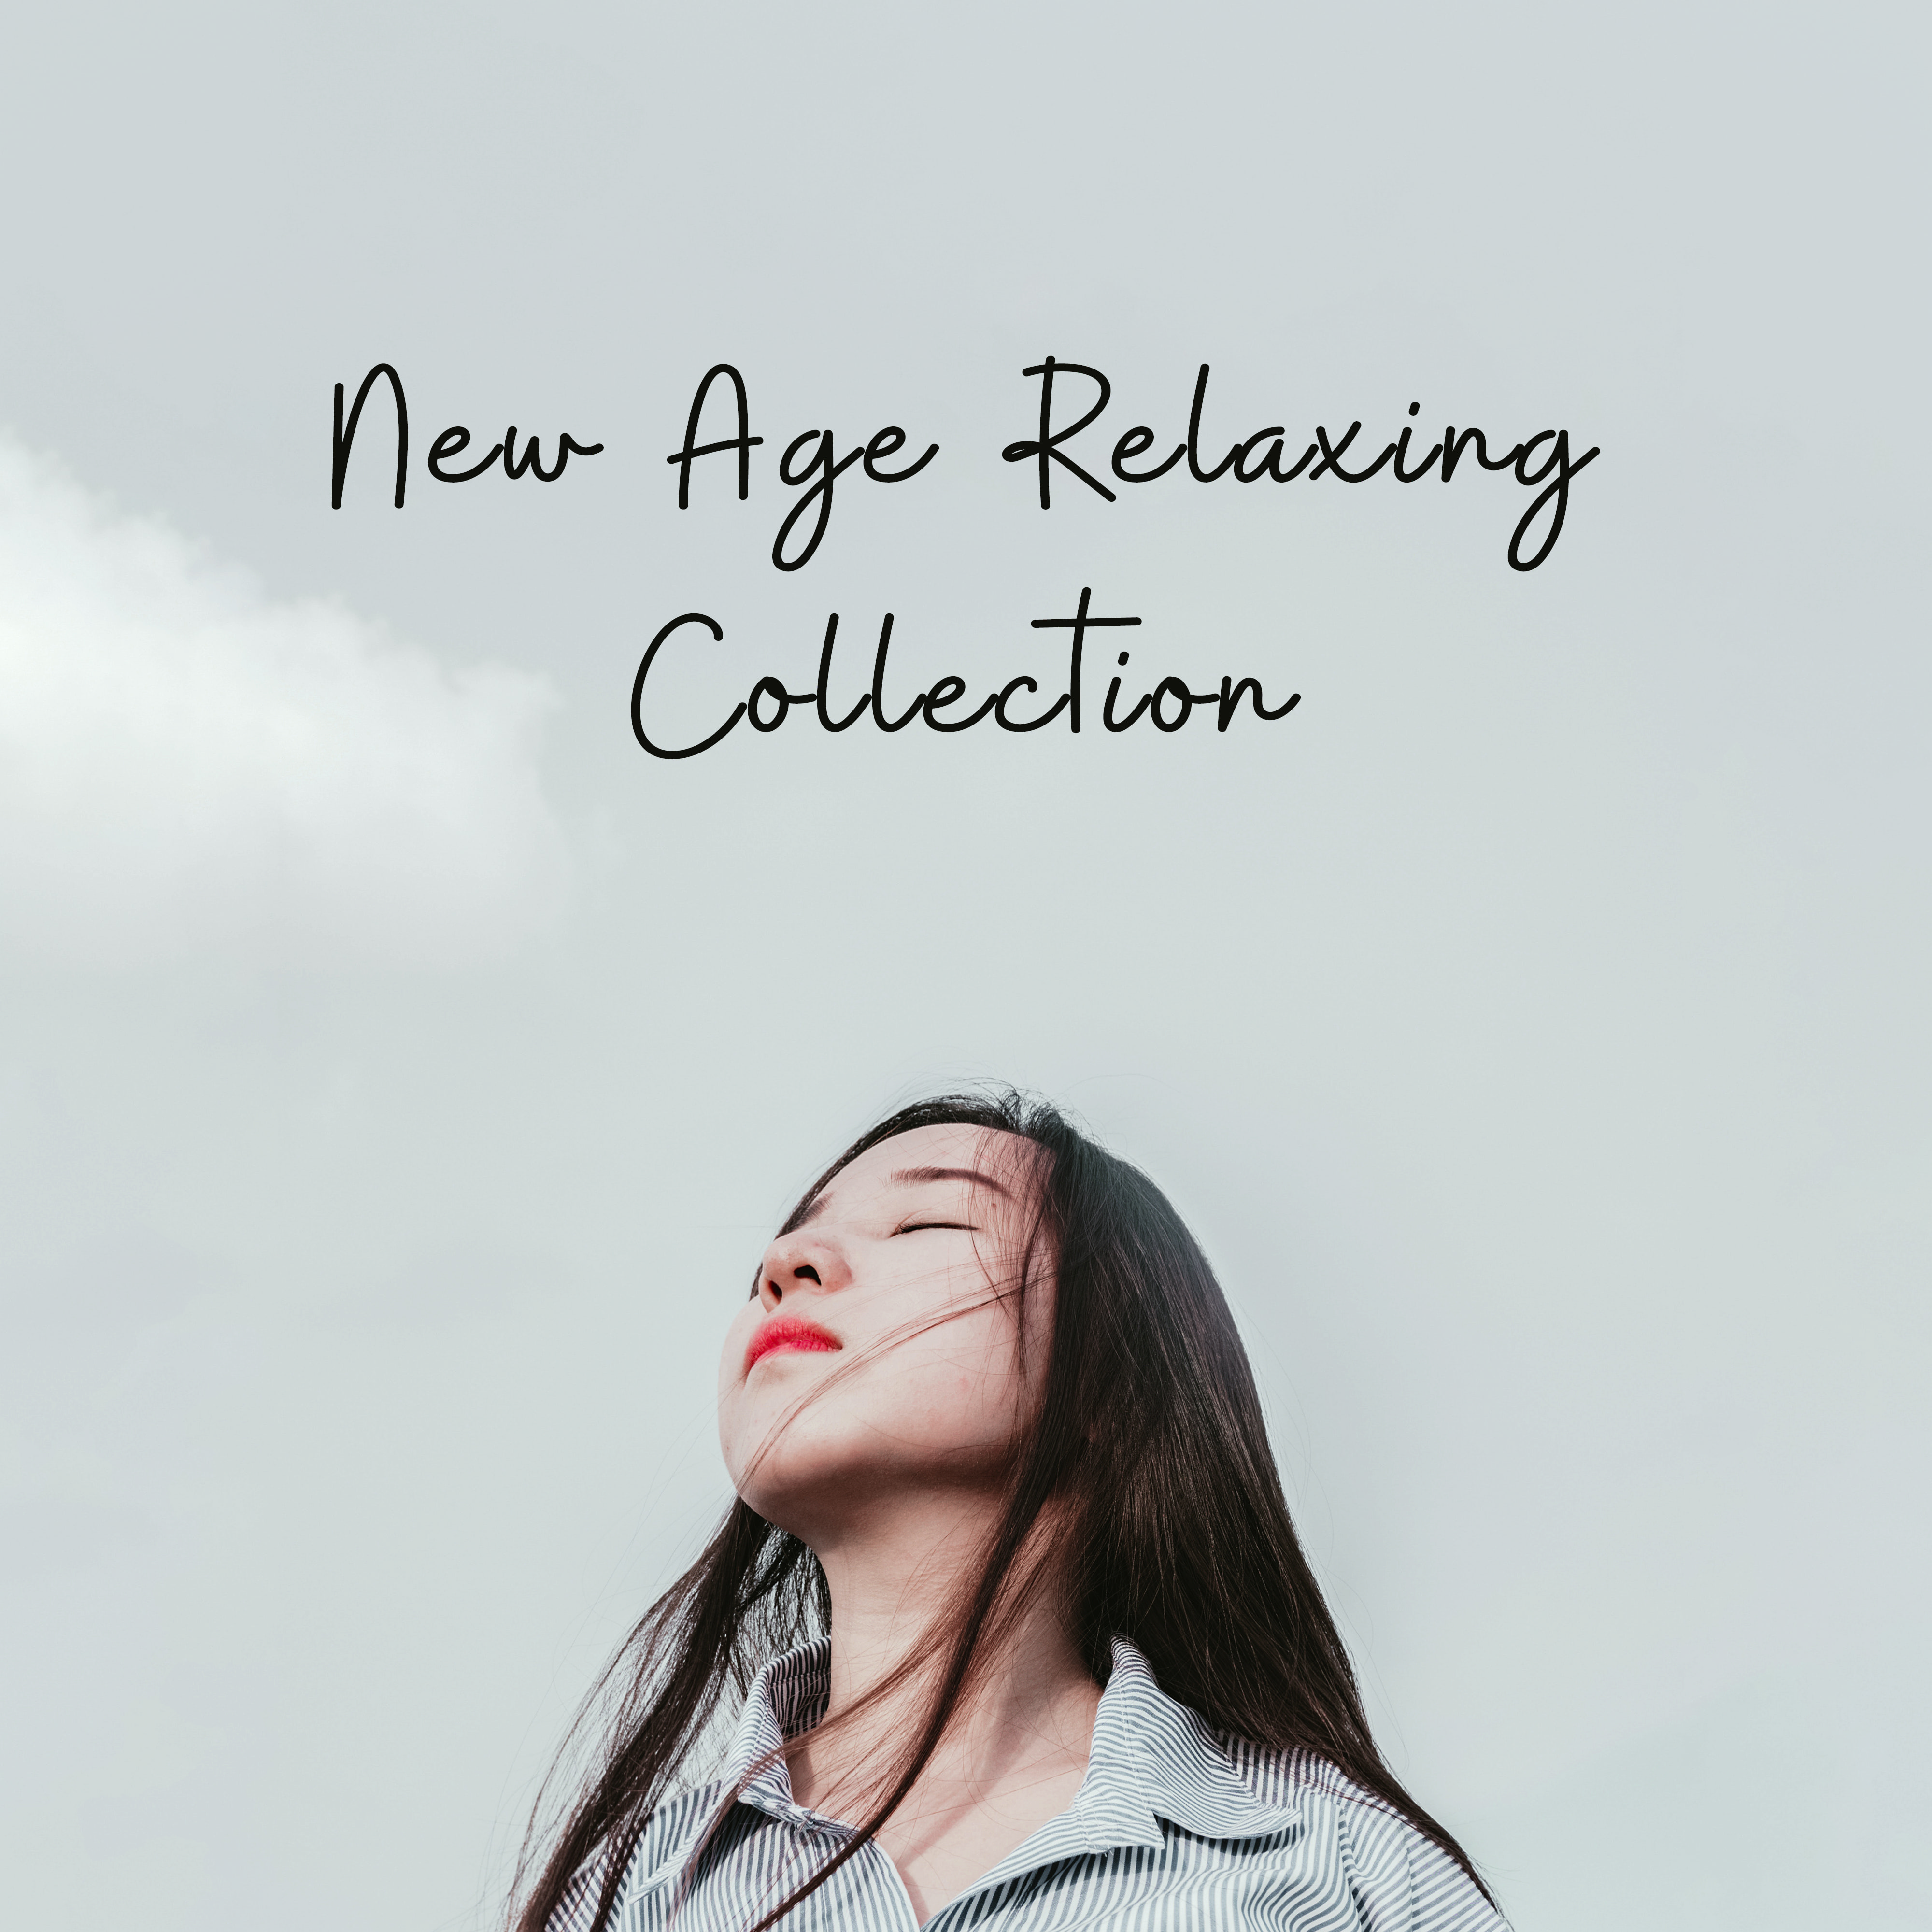 New Age Relaxing Collection